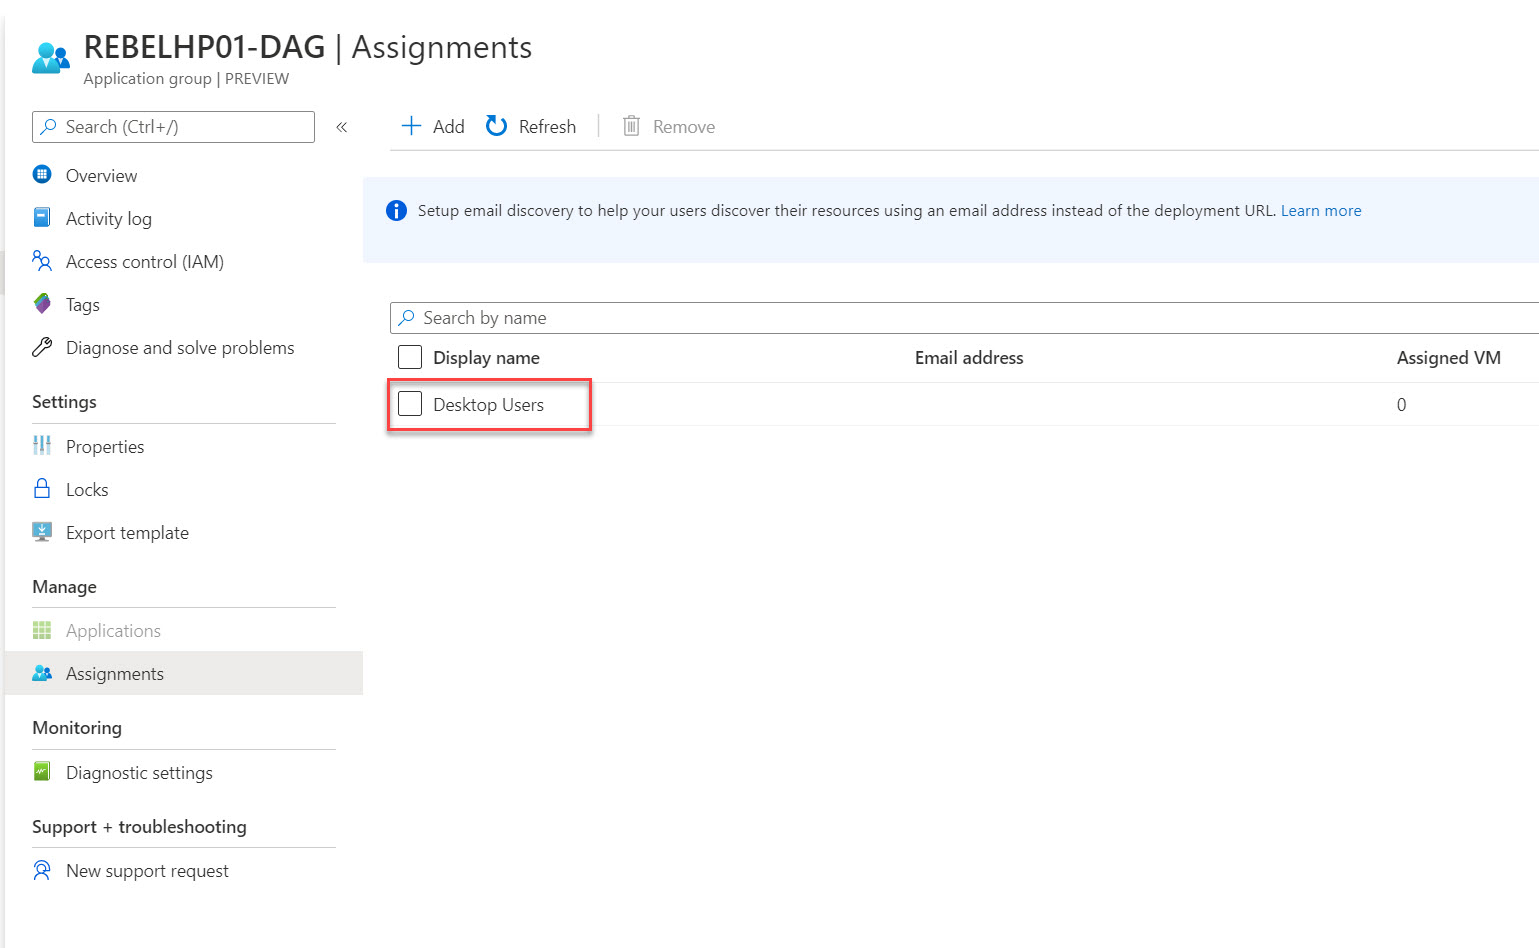 verify application group assignments